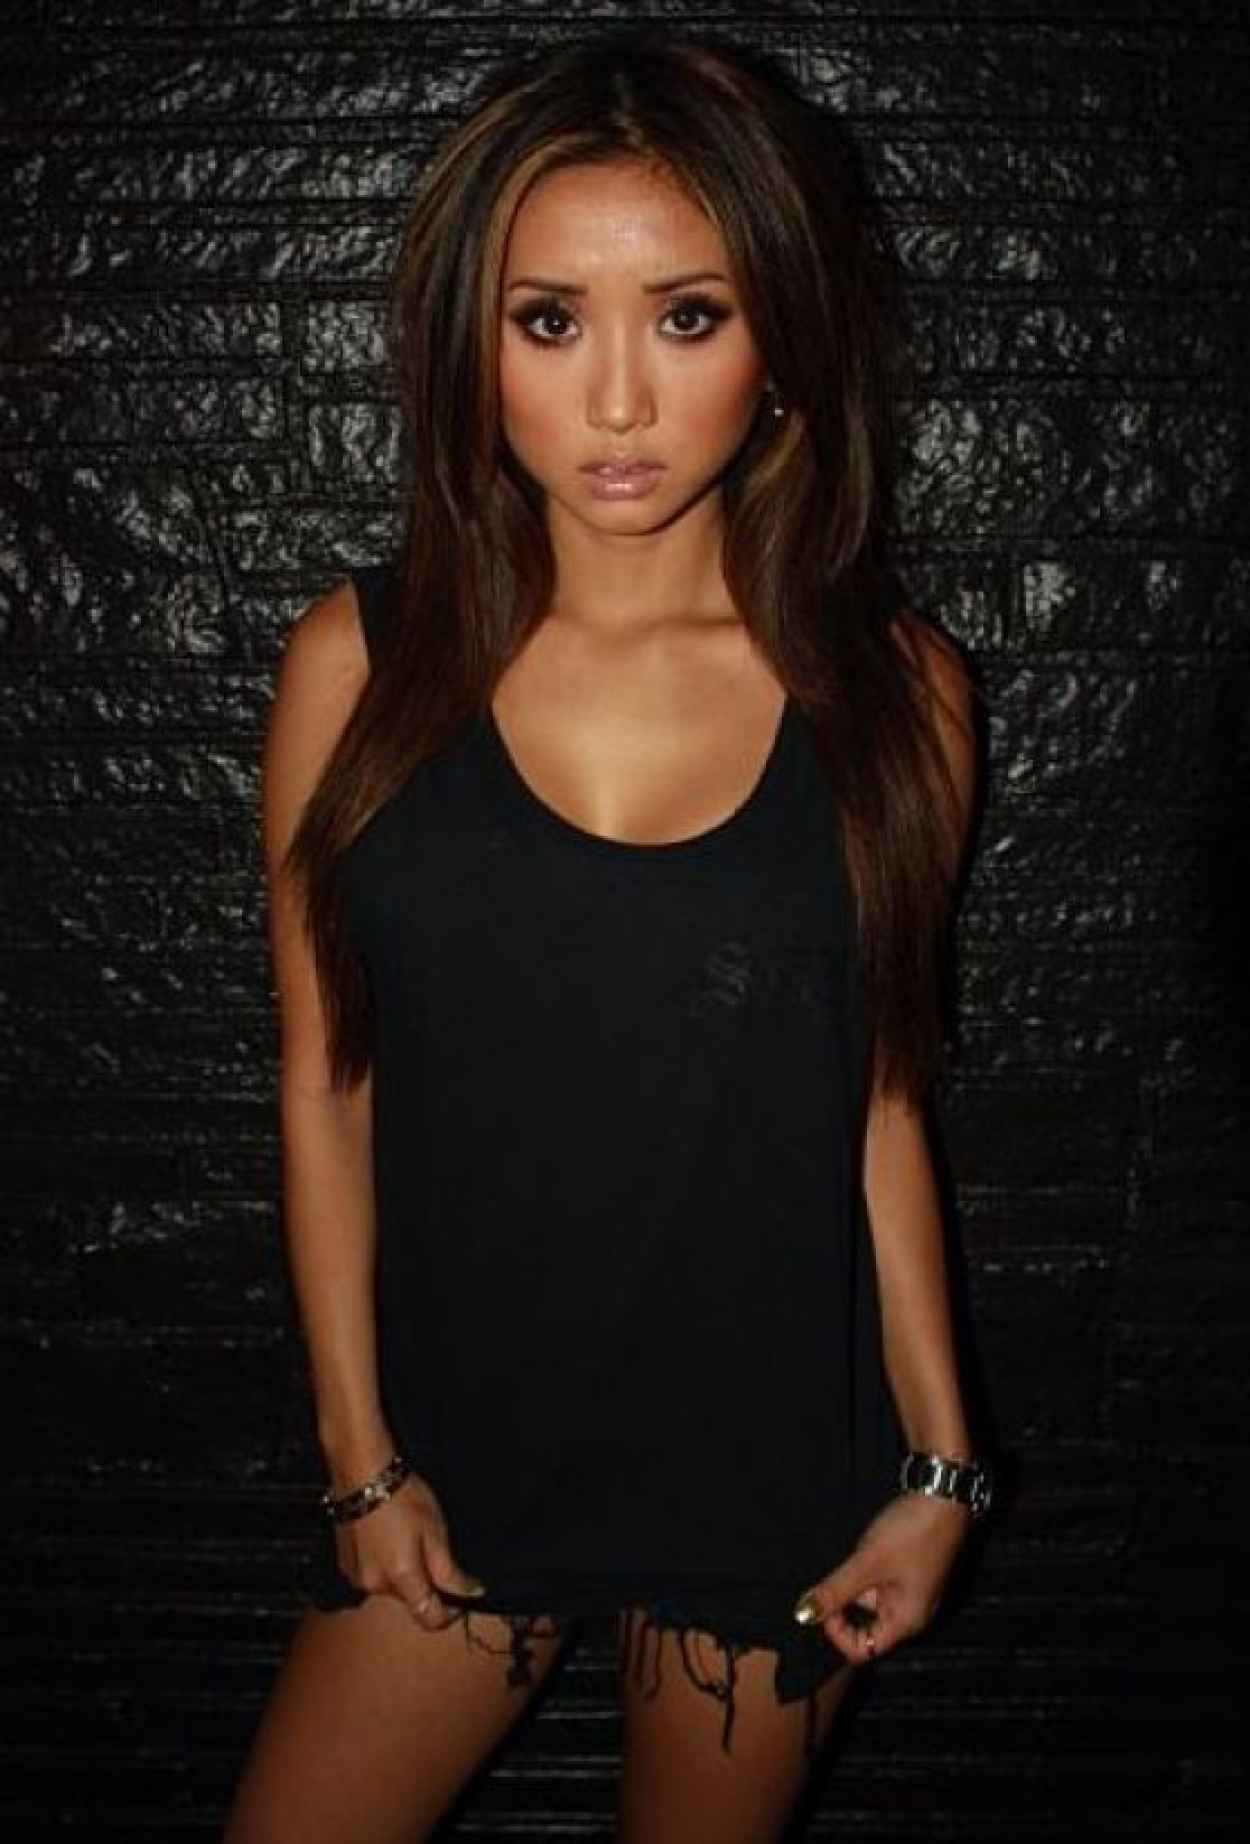 Brenda Song Instagram Personal Photos - January 2015 Collection.